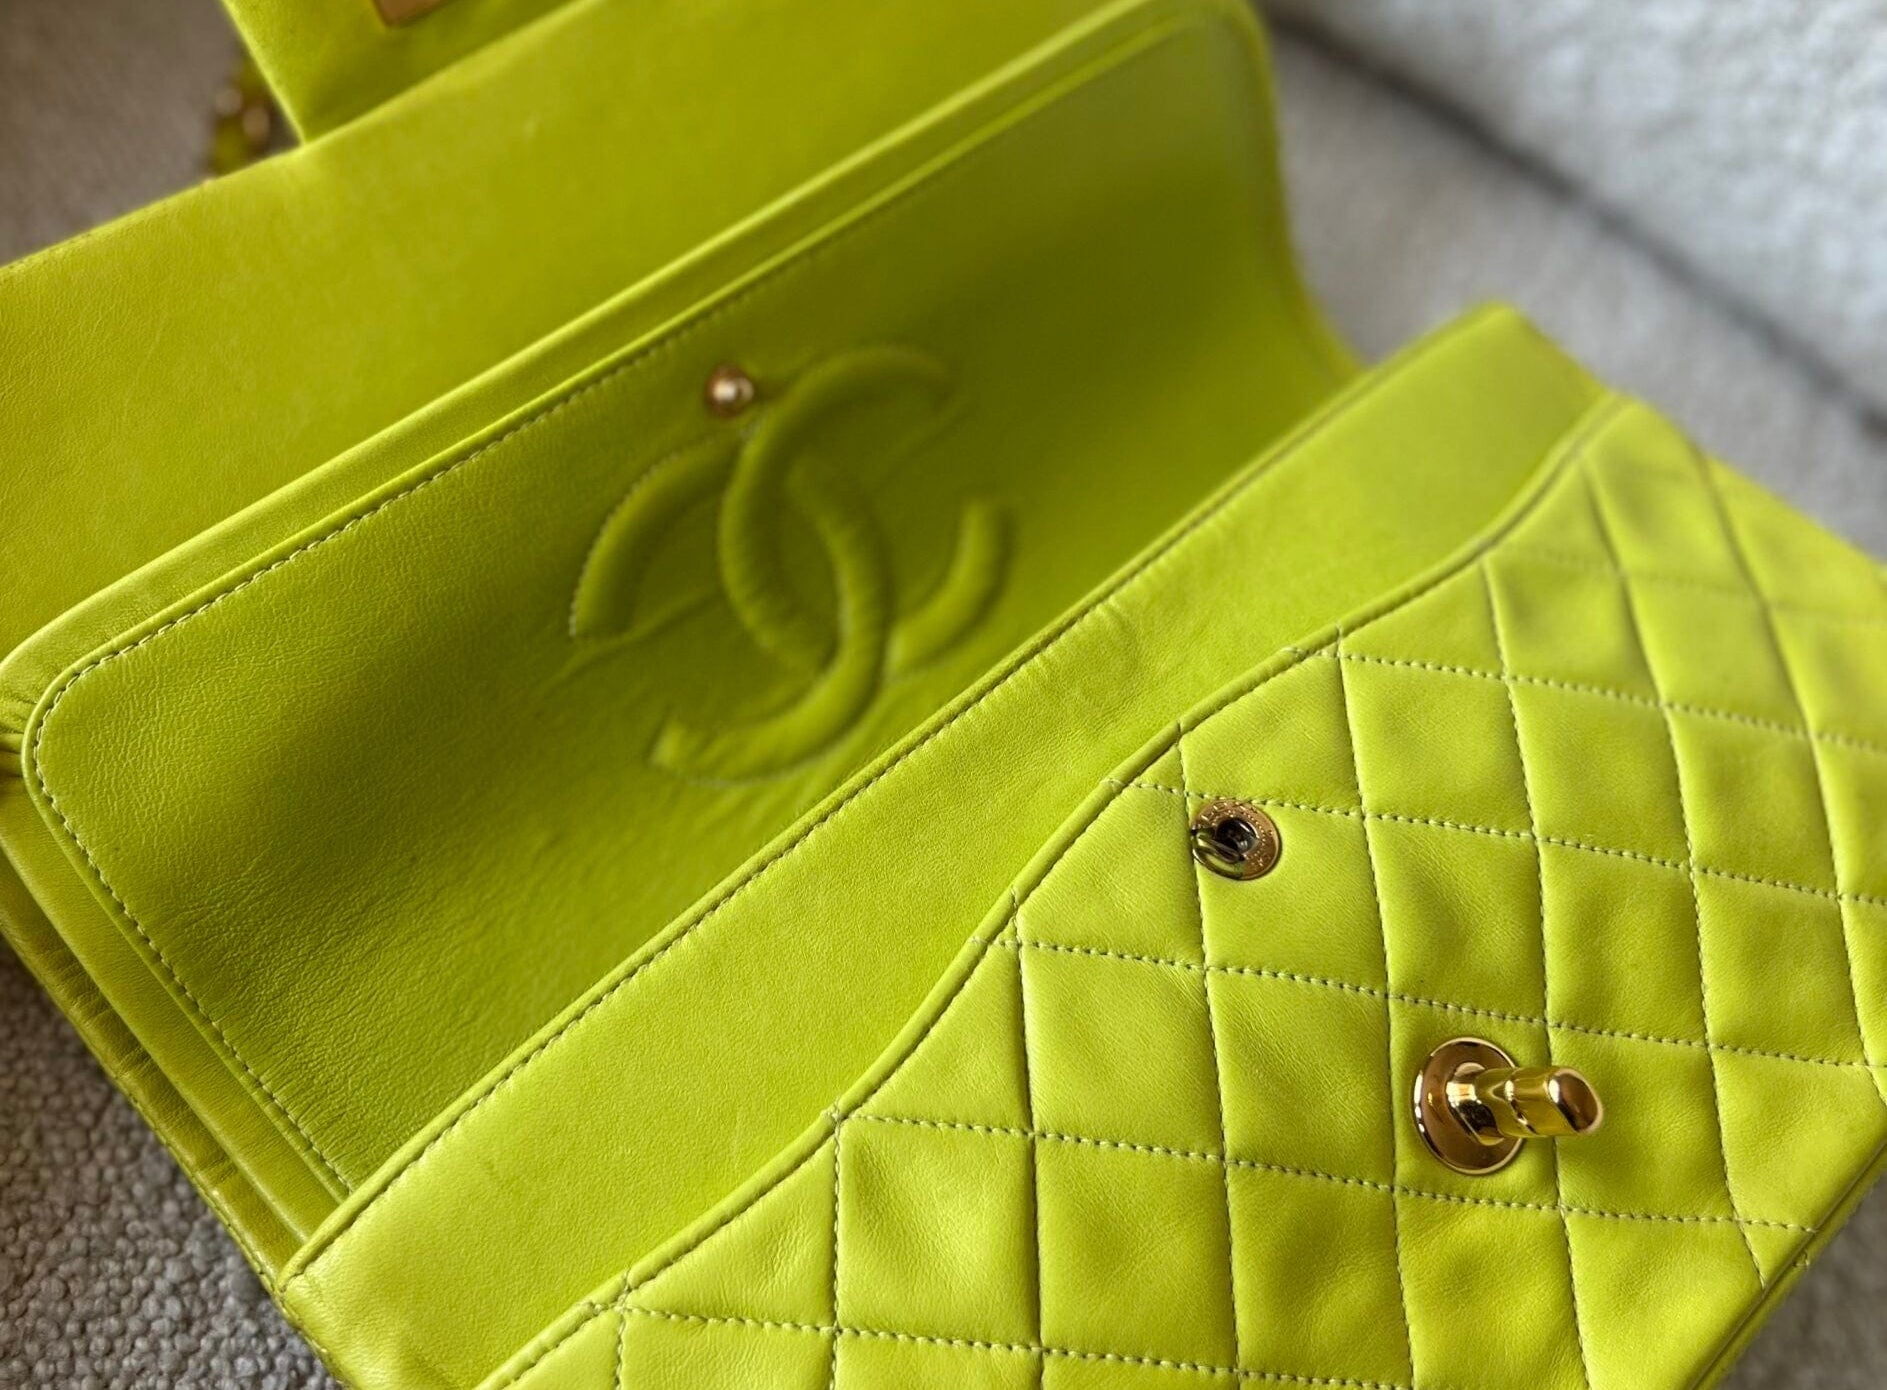 CHANEL Handbag Vintage Neon Green Lambskin Quilted Classic Double Flap Medium Gold Hardware - Redeluxe